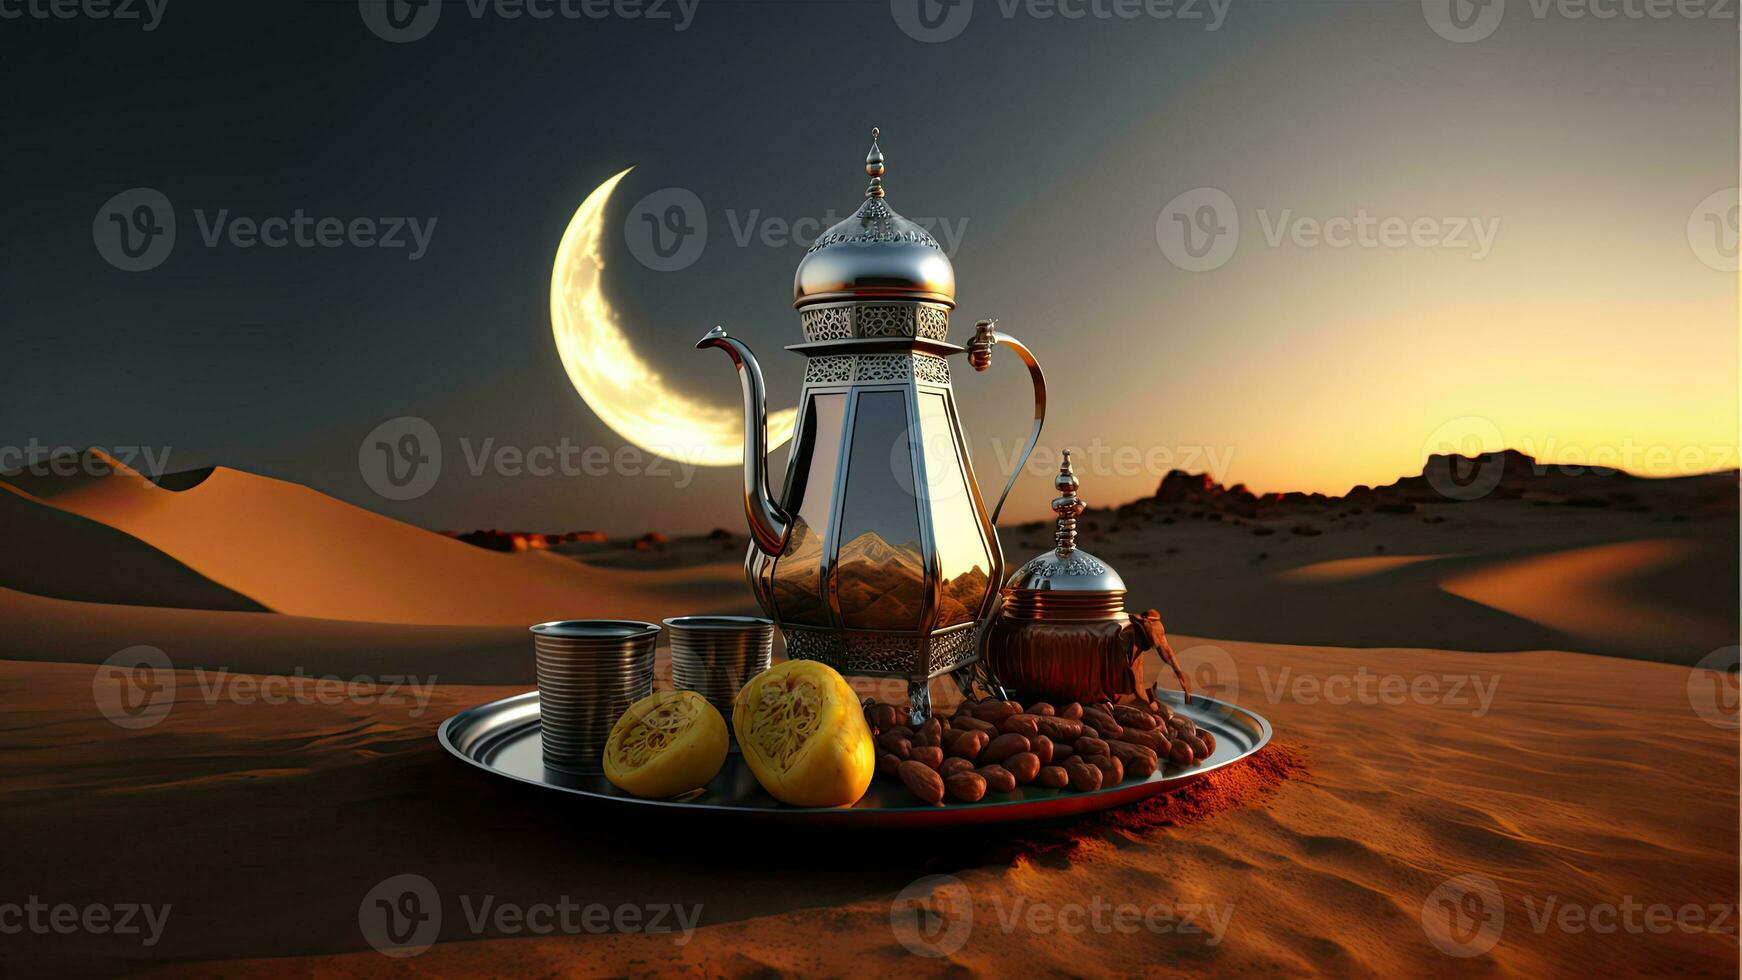 3D Render of Arabic Tea or Coffee Pot With Mug, Fruit On Plate In Night Time. Islamic Religious Concept. photo